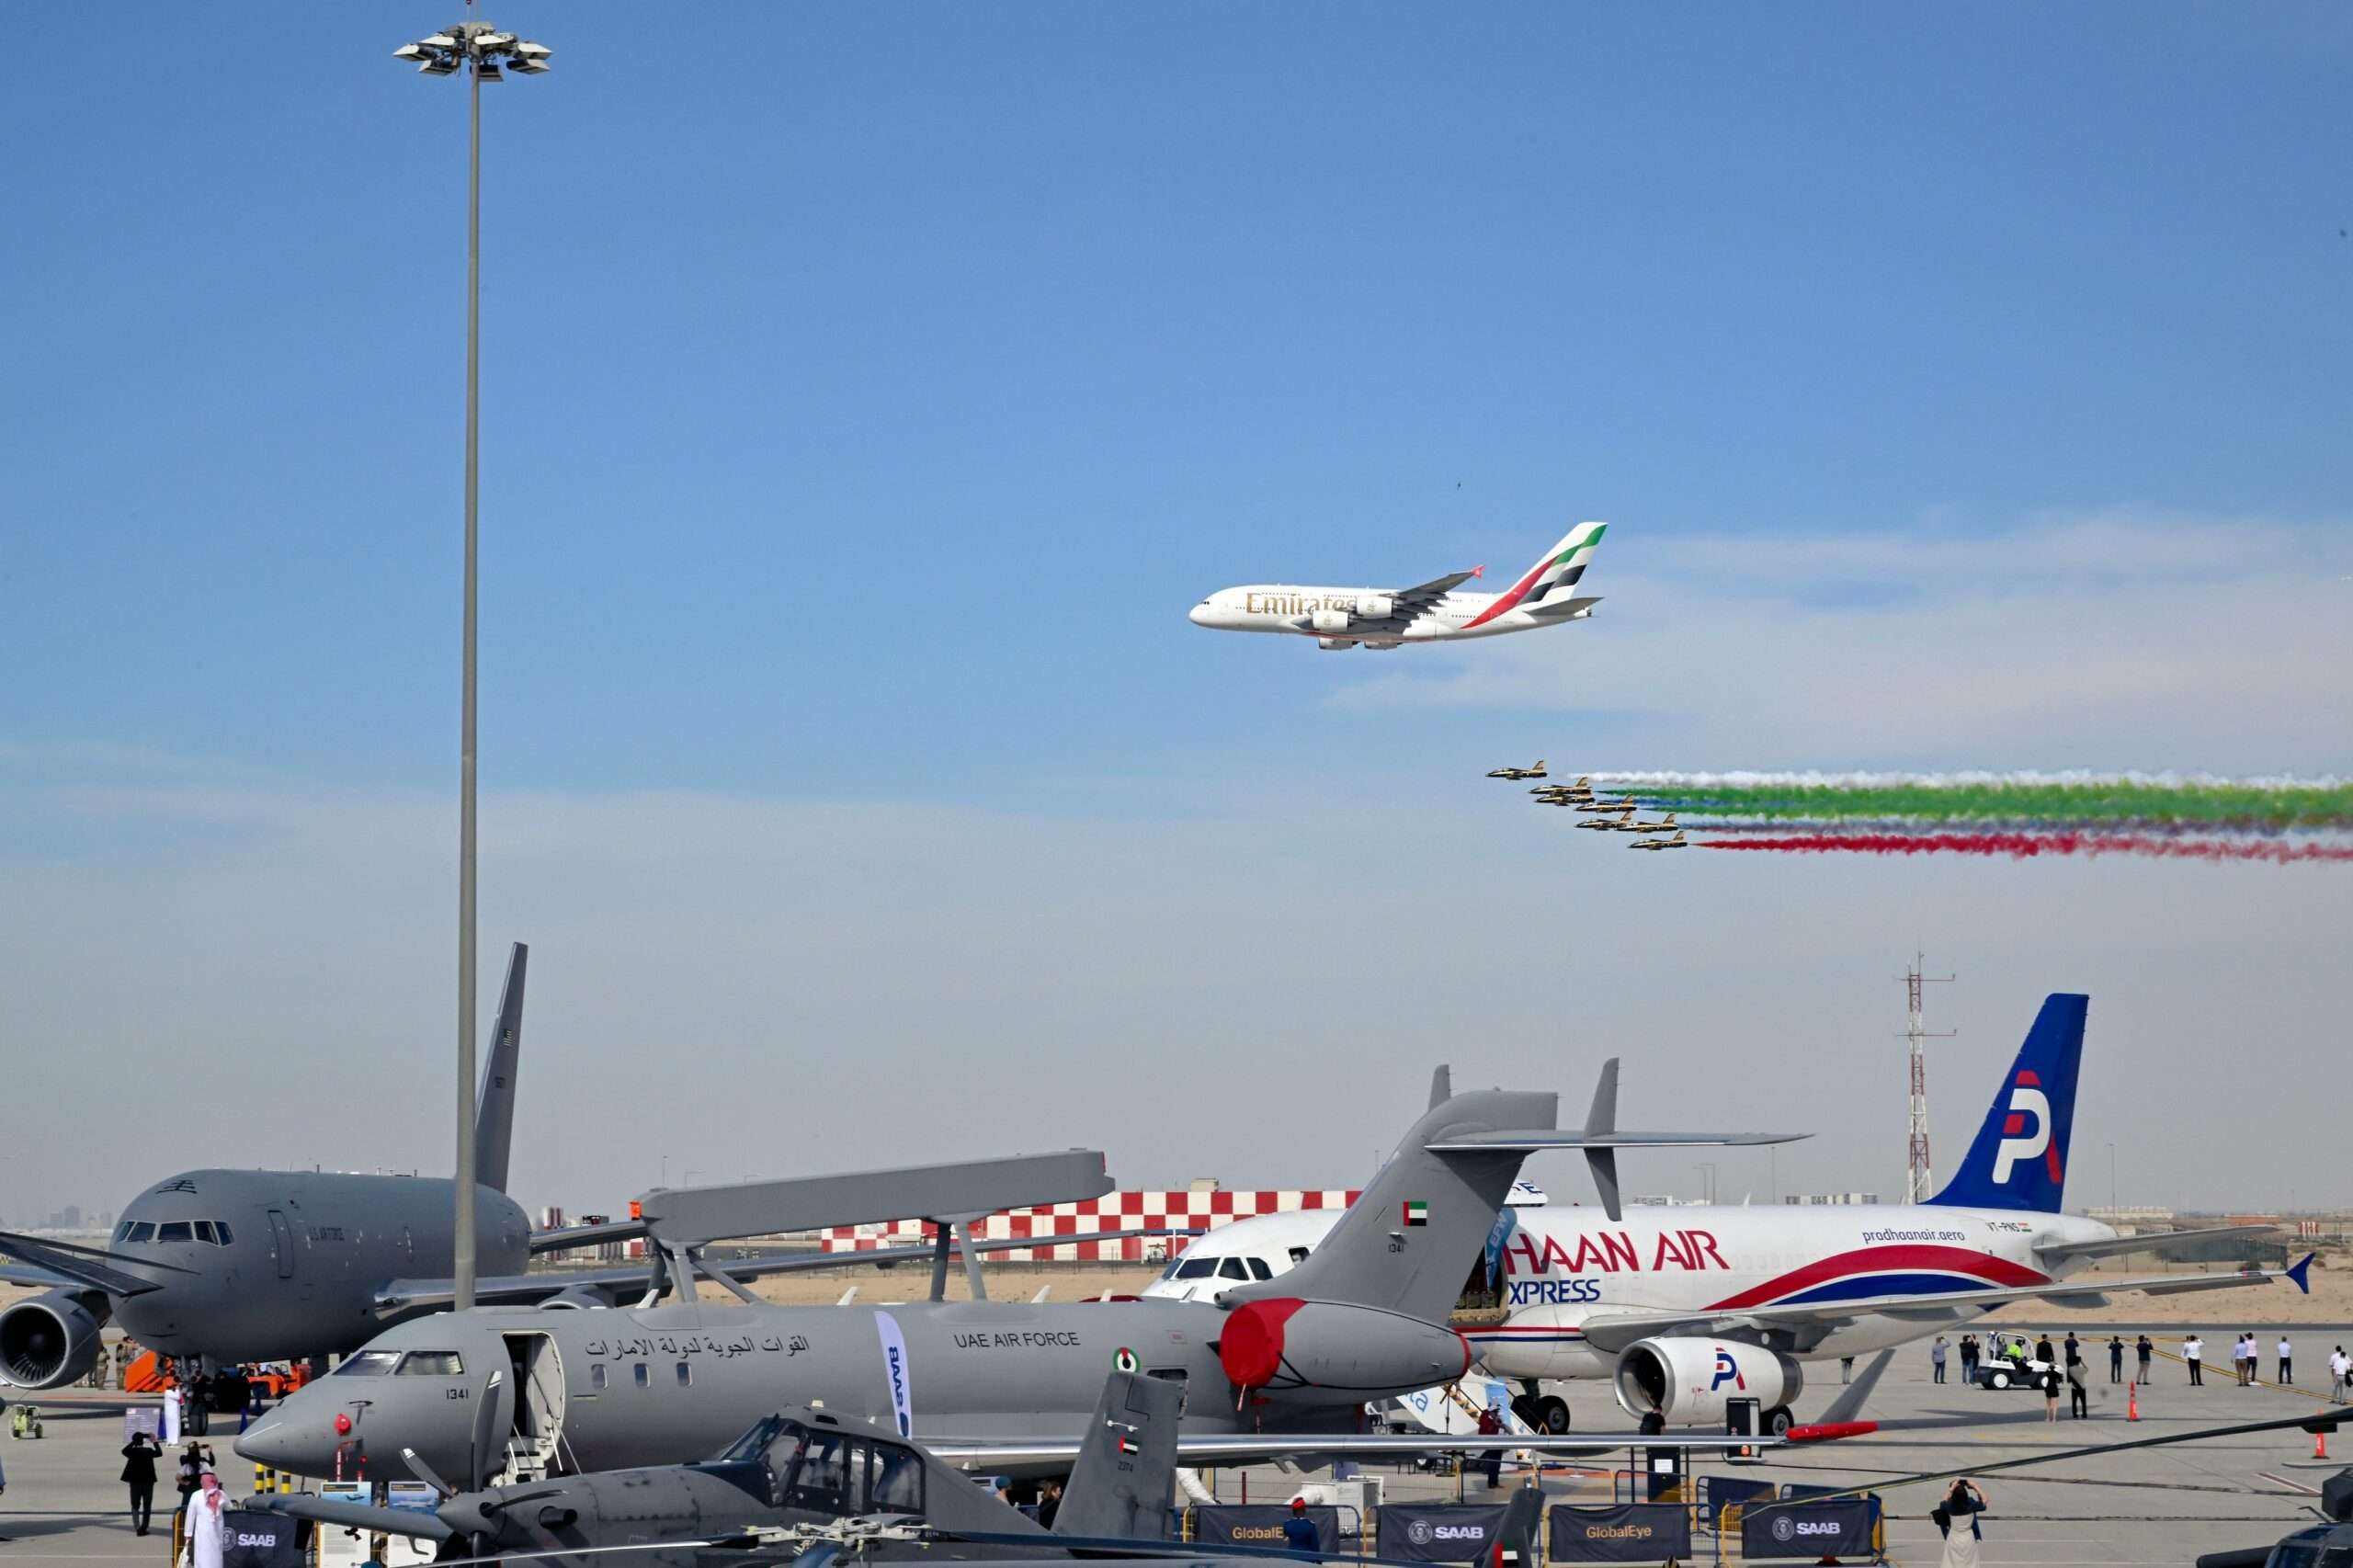 Dubai Airshow: What Were The Final Scores for Aircraft Orders?